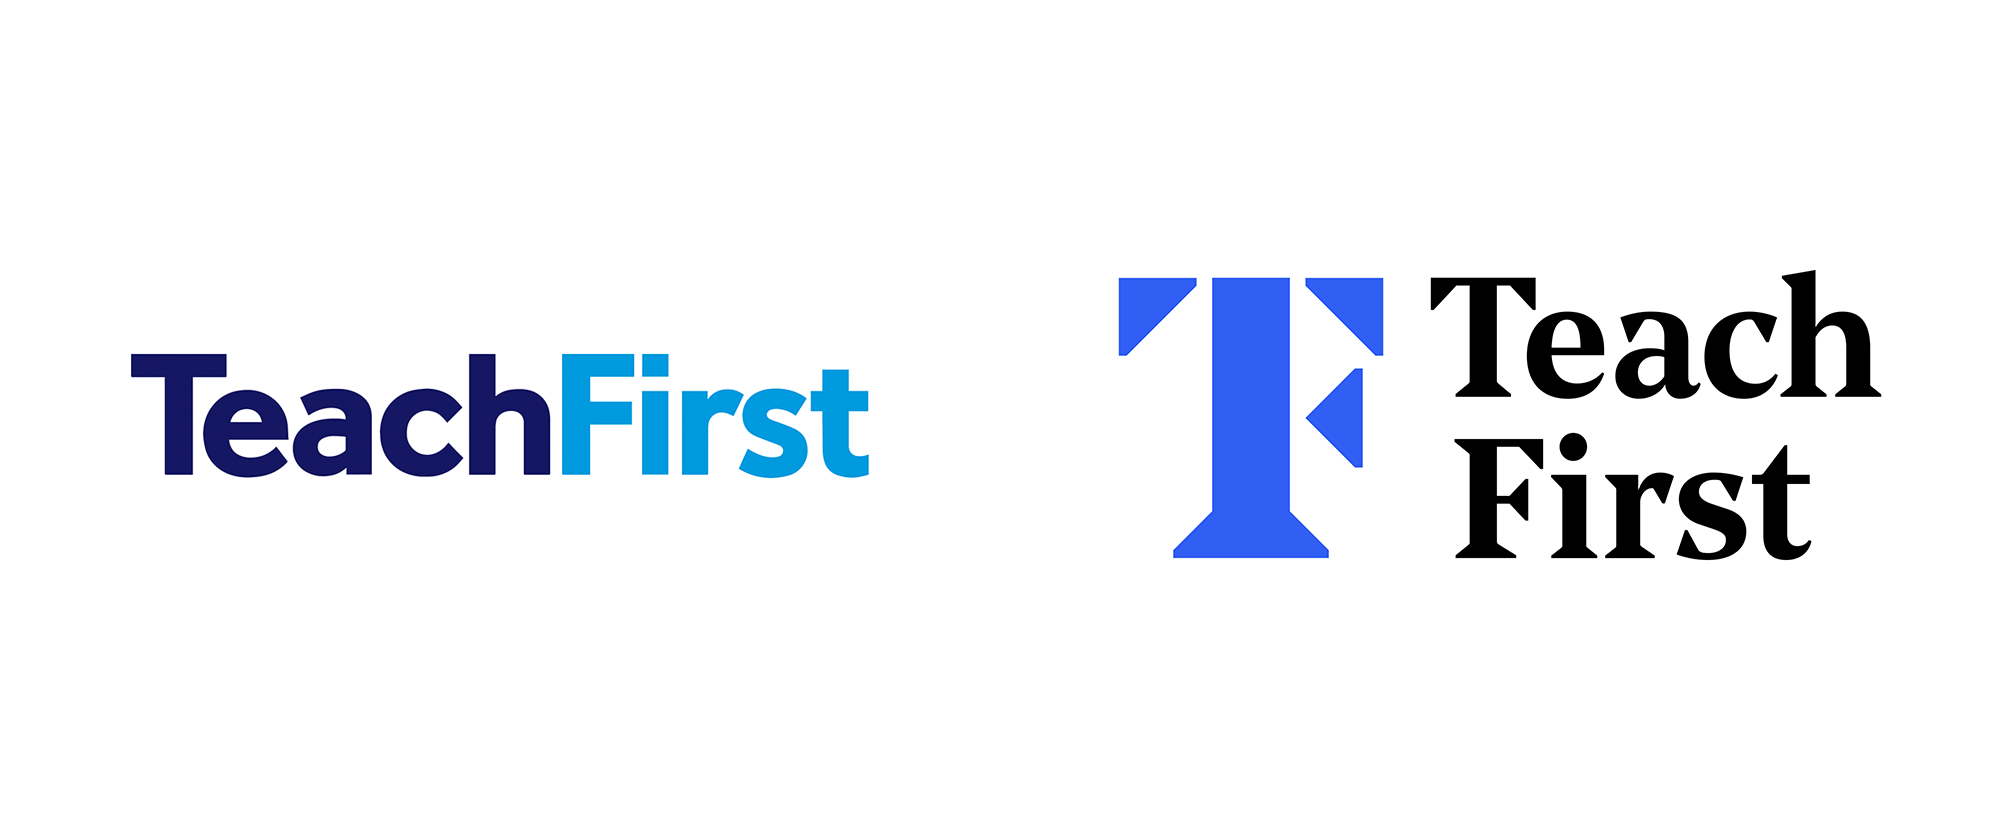 New Logo and Identity for Teach First by Johnson Banks